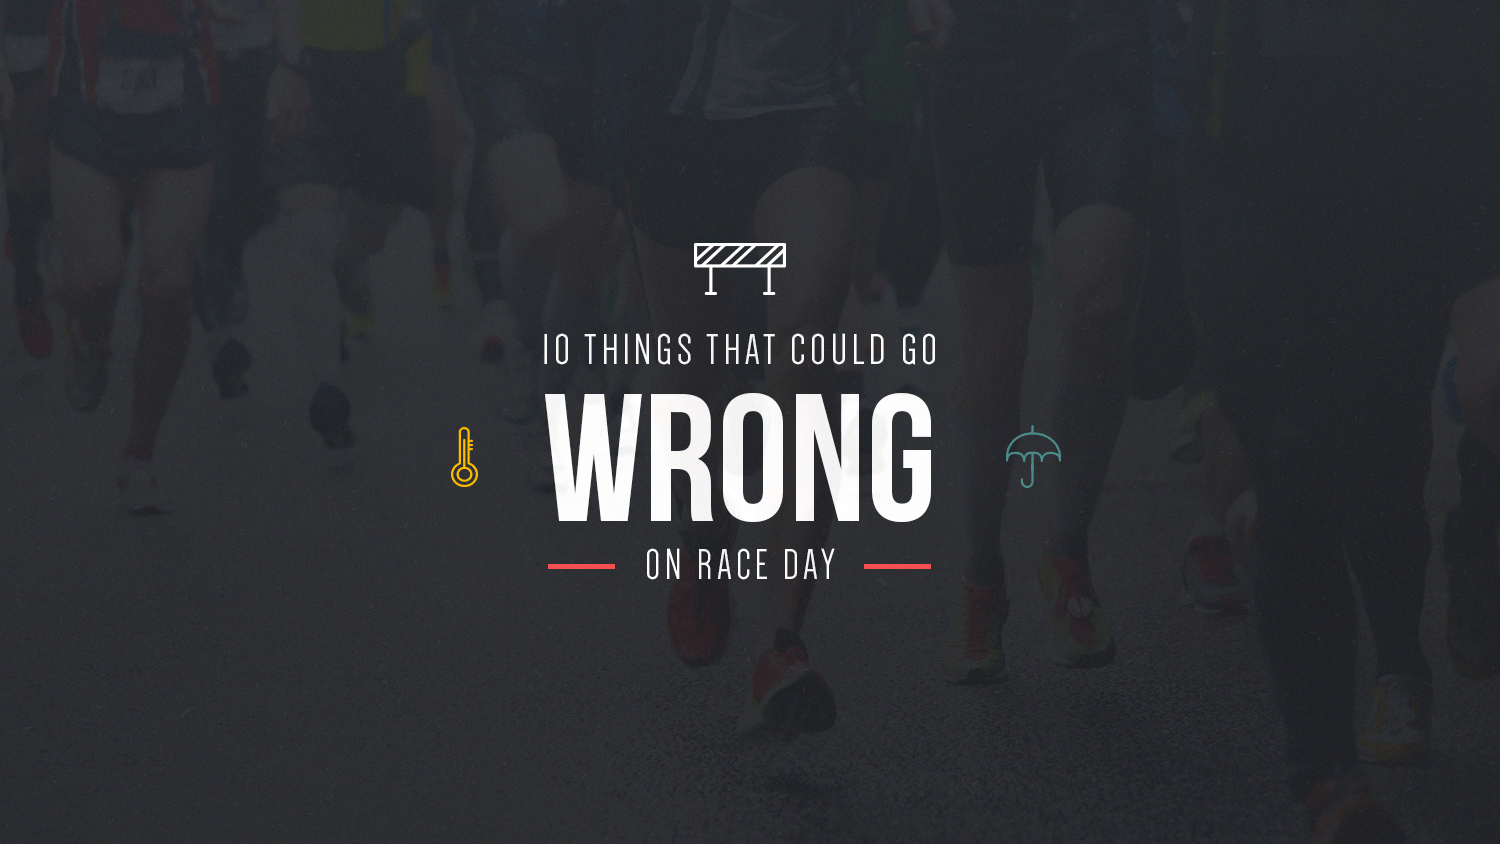 10 Things that could go wrong on race day graphic